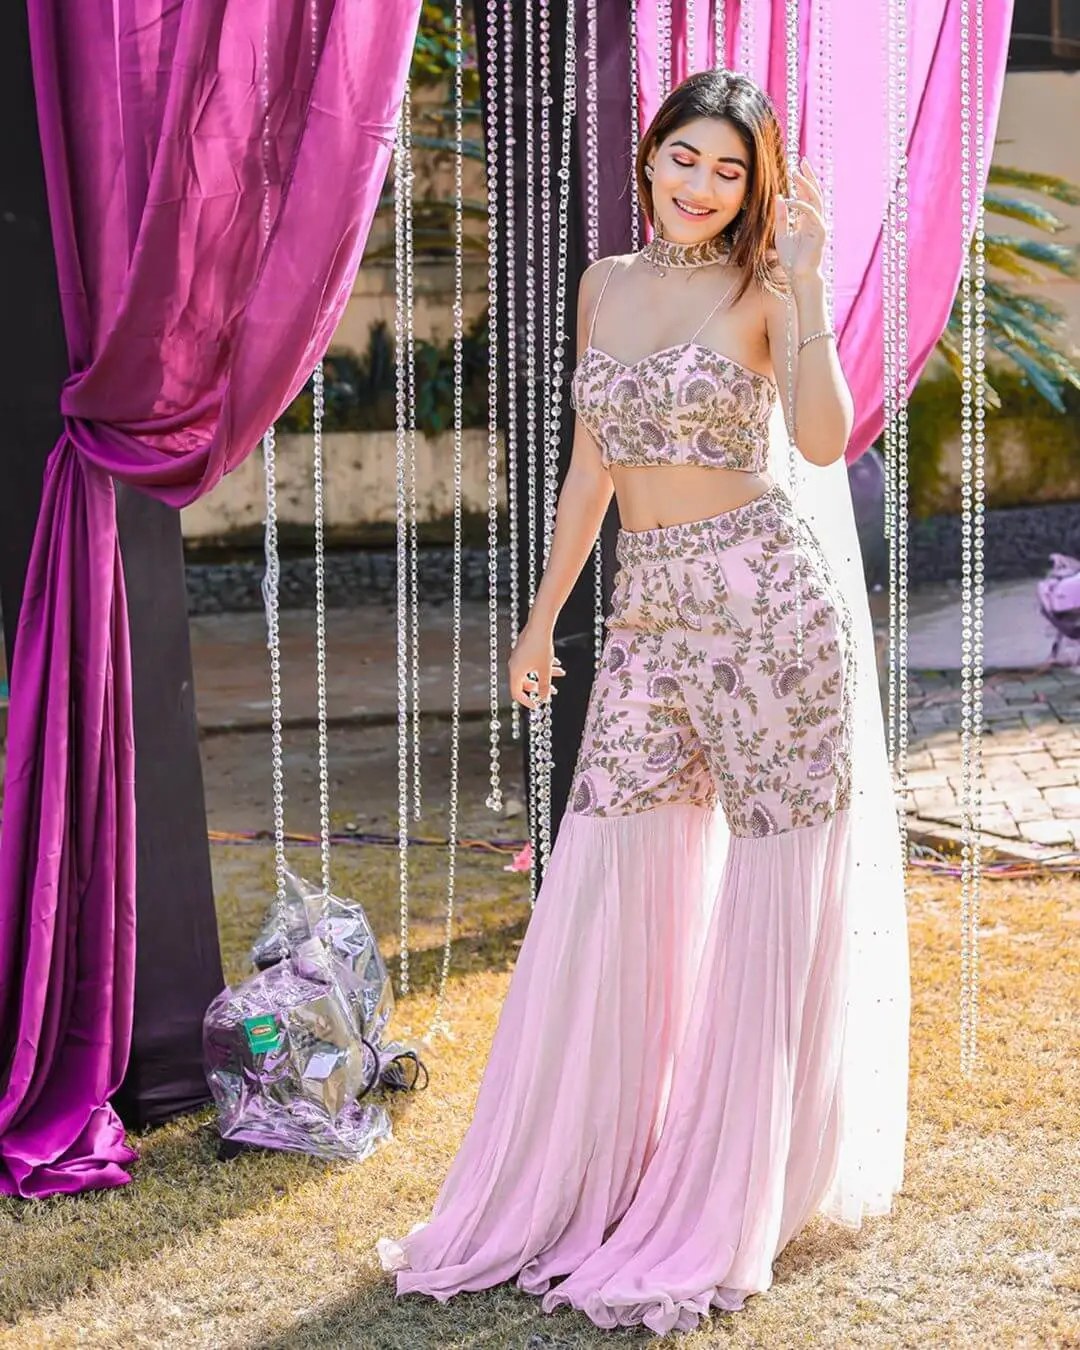 Super Fresh Pool Party Outfit Ideas Real Brides Slayed ! - Witty Vows